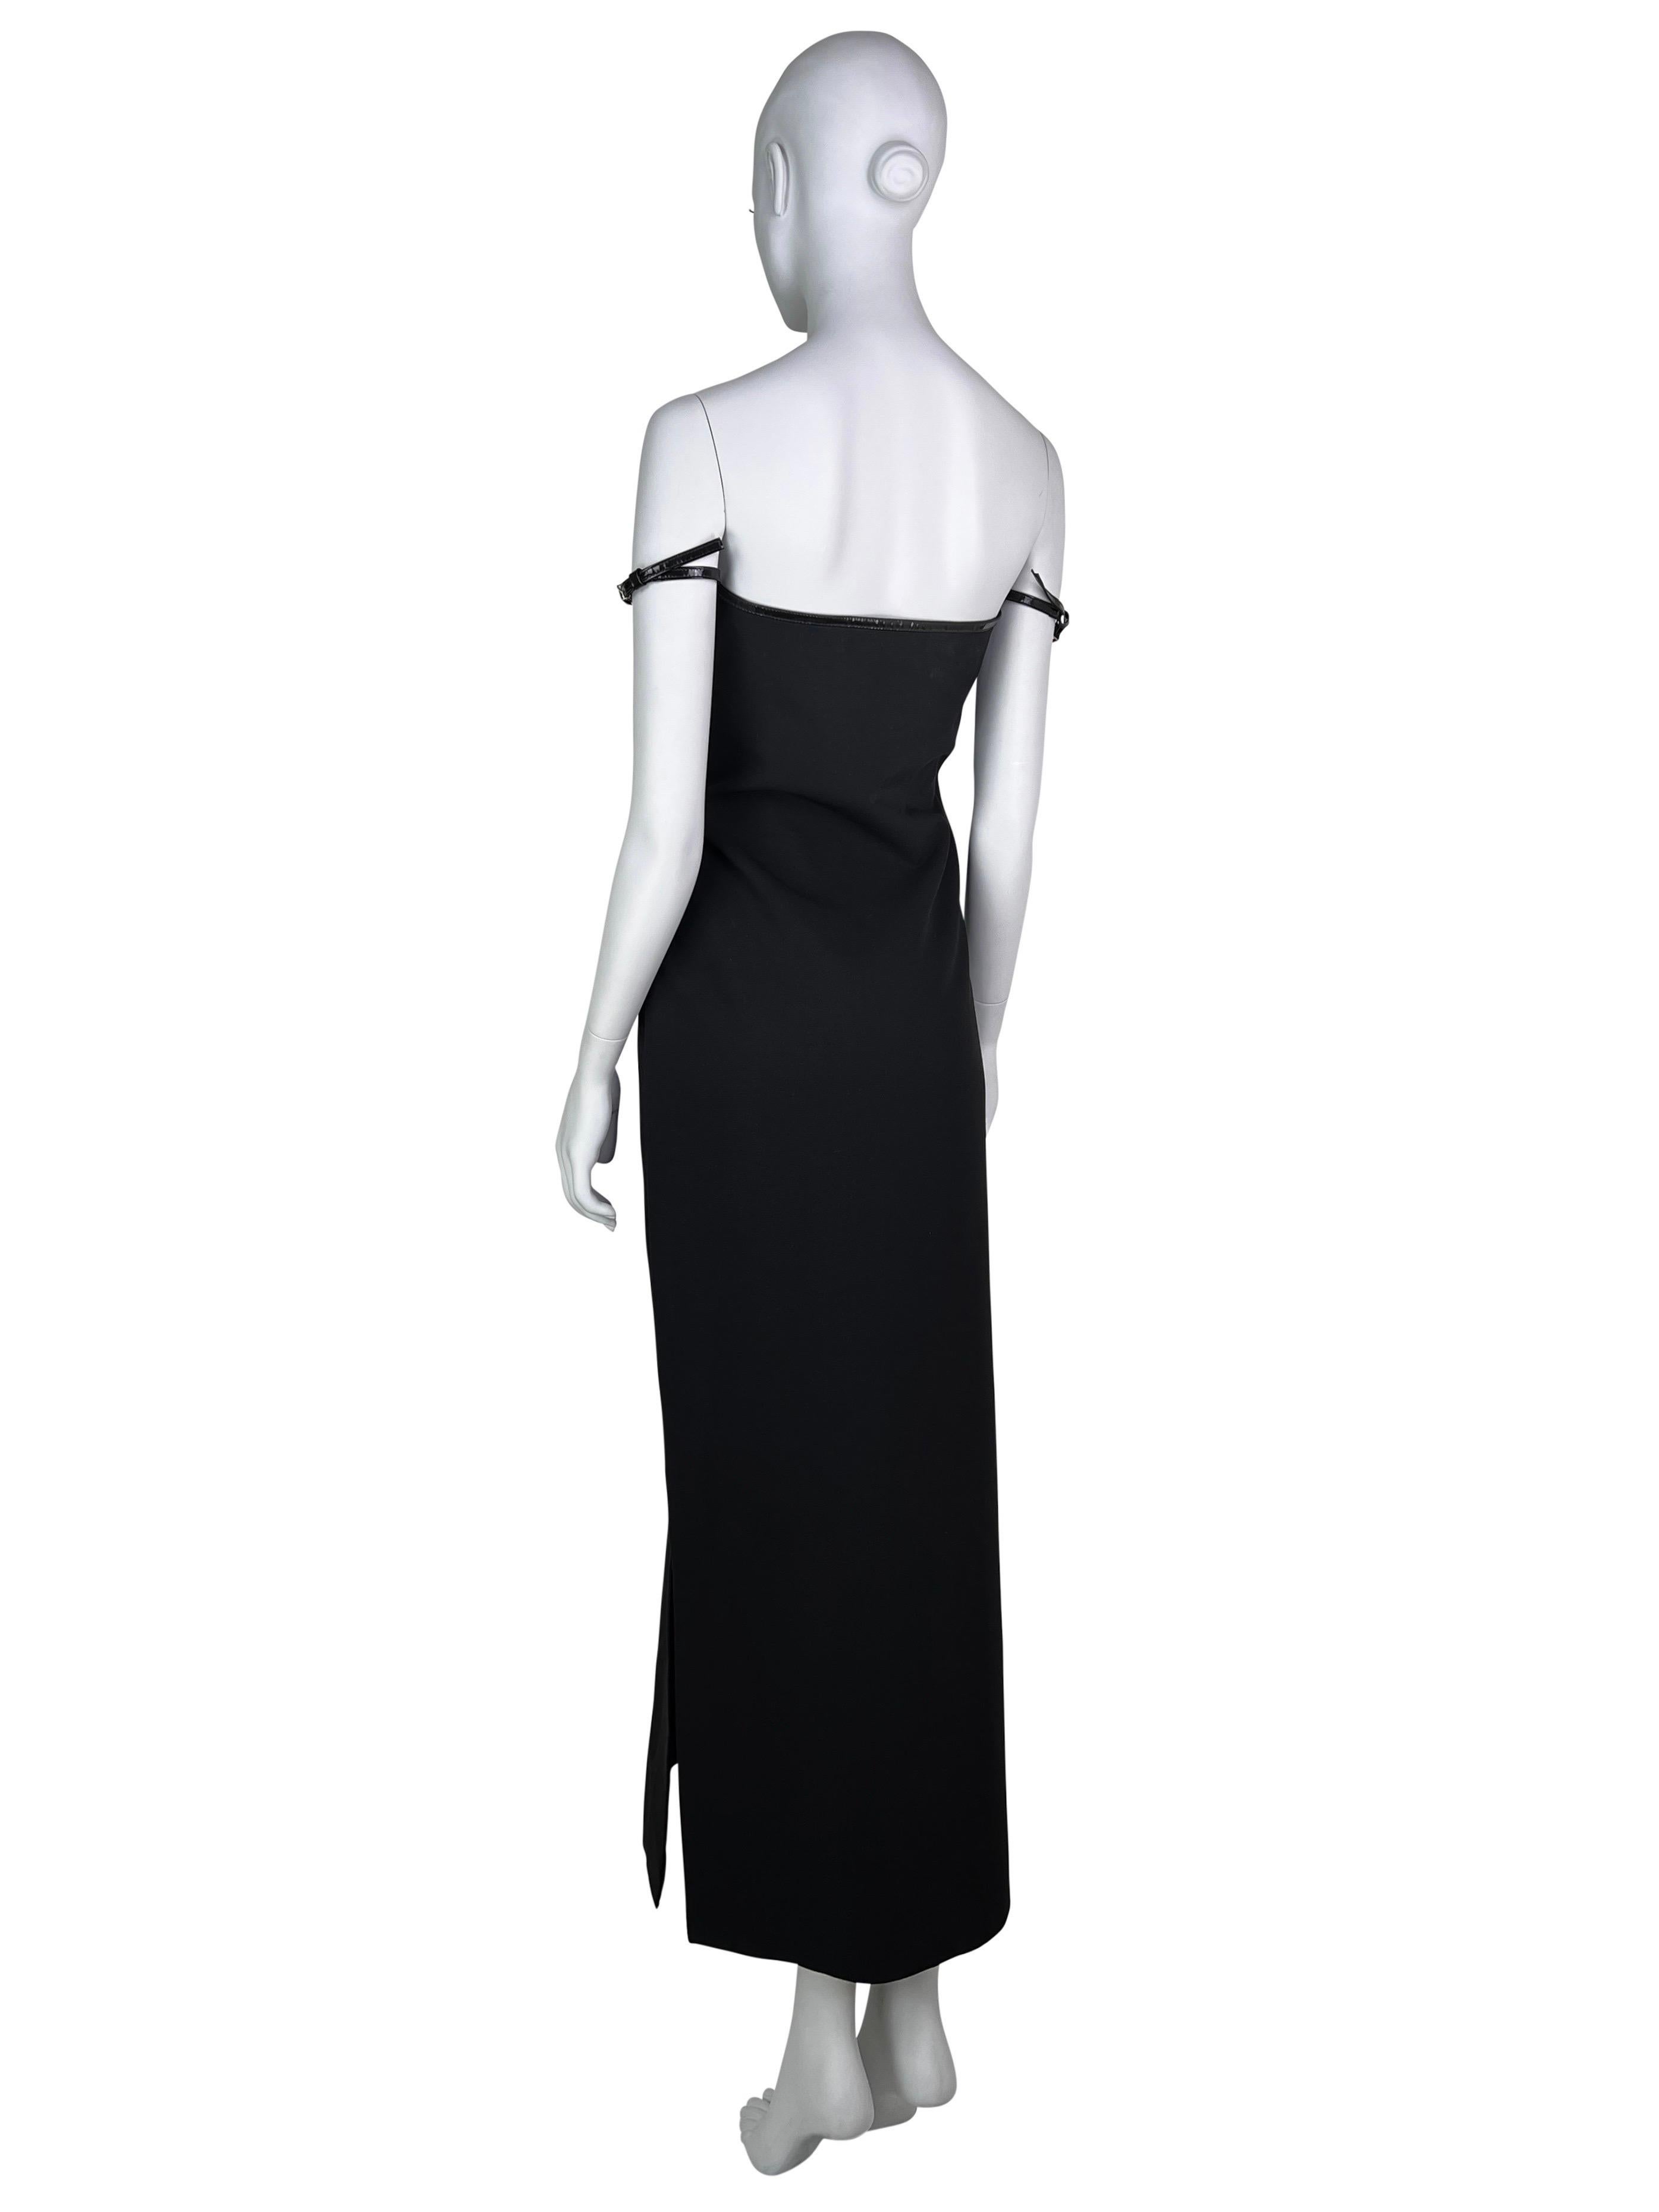 Gucci by Tom Ford Fall 1997 G-logo Strap Evening Black Dress For Sale 9